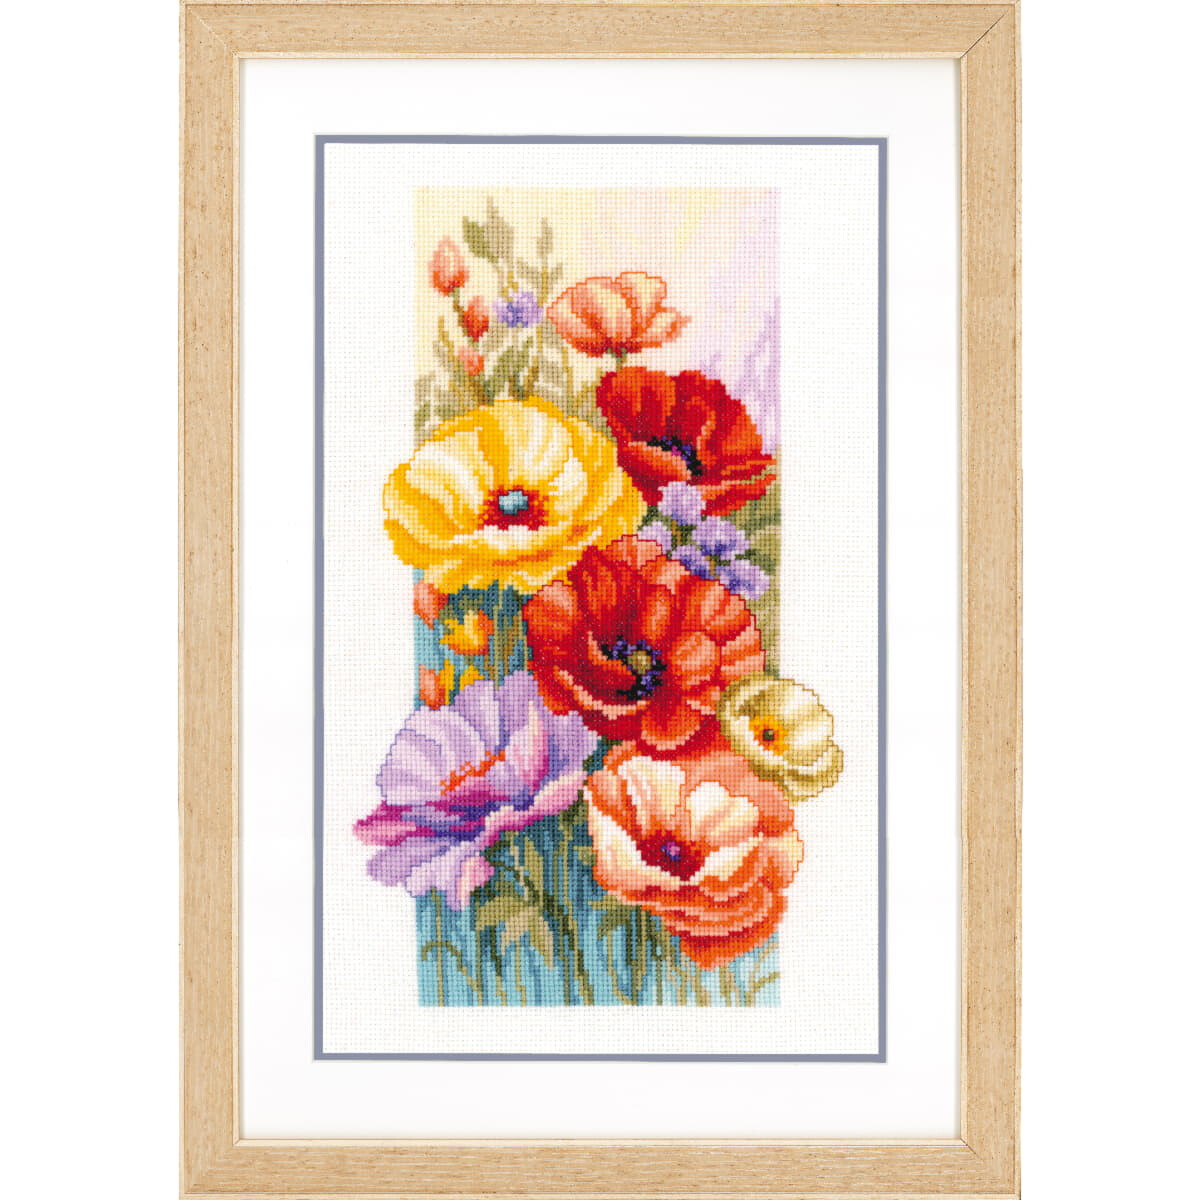 Vervaco counted cross stitch kit "Poppies",...